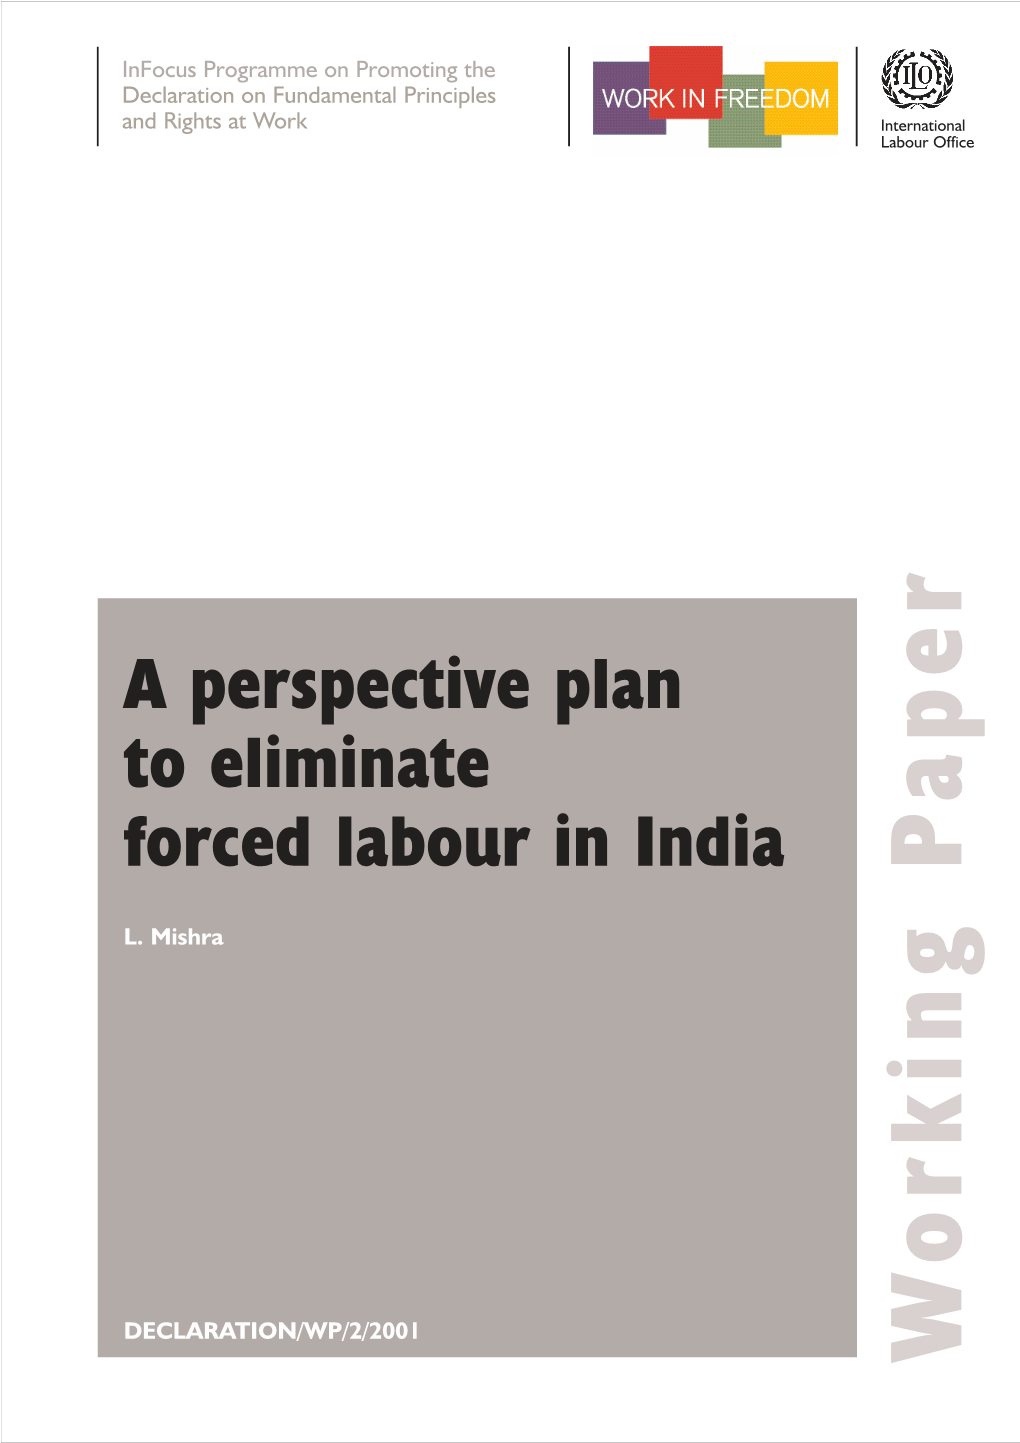 A Perspective Plan to Eliminate Forced Labour in India